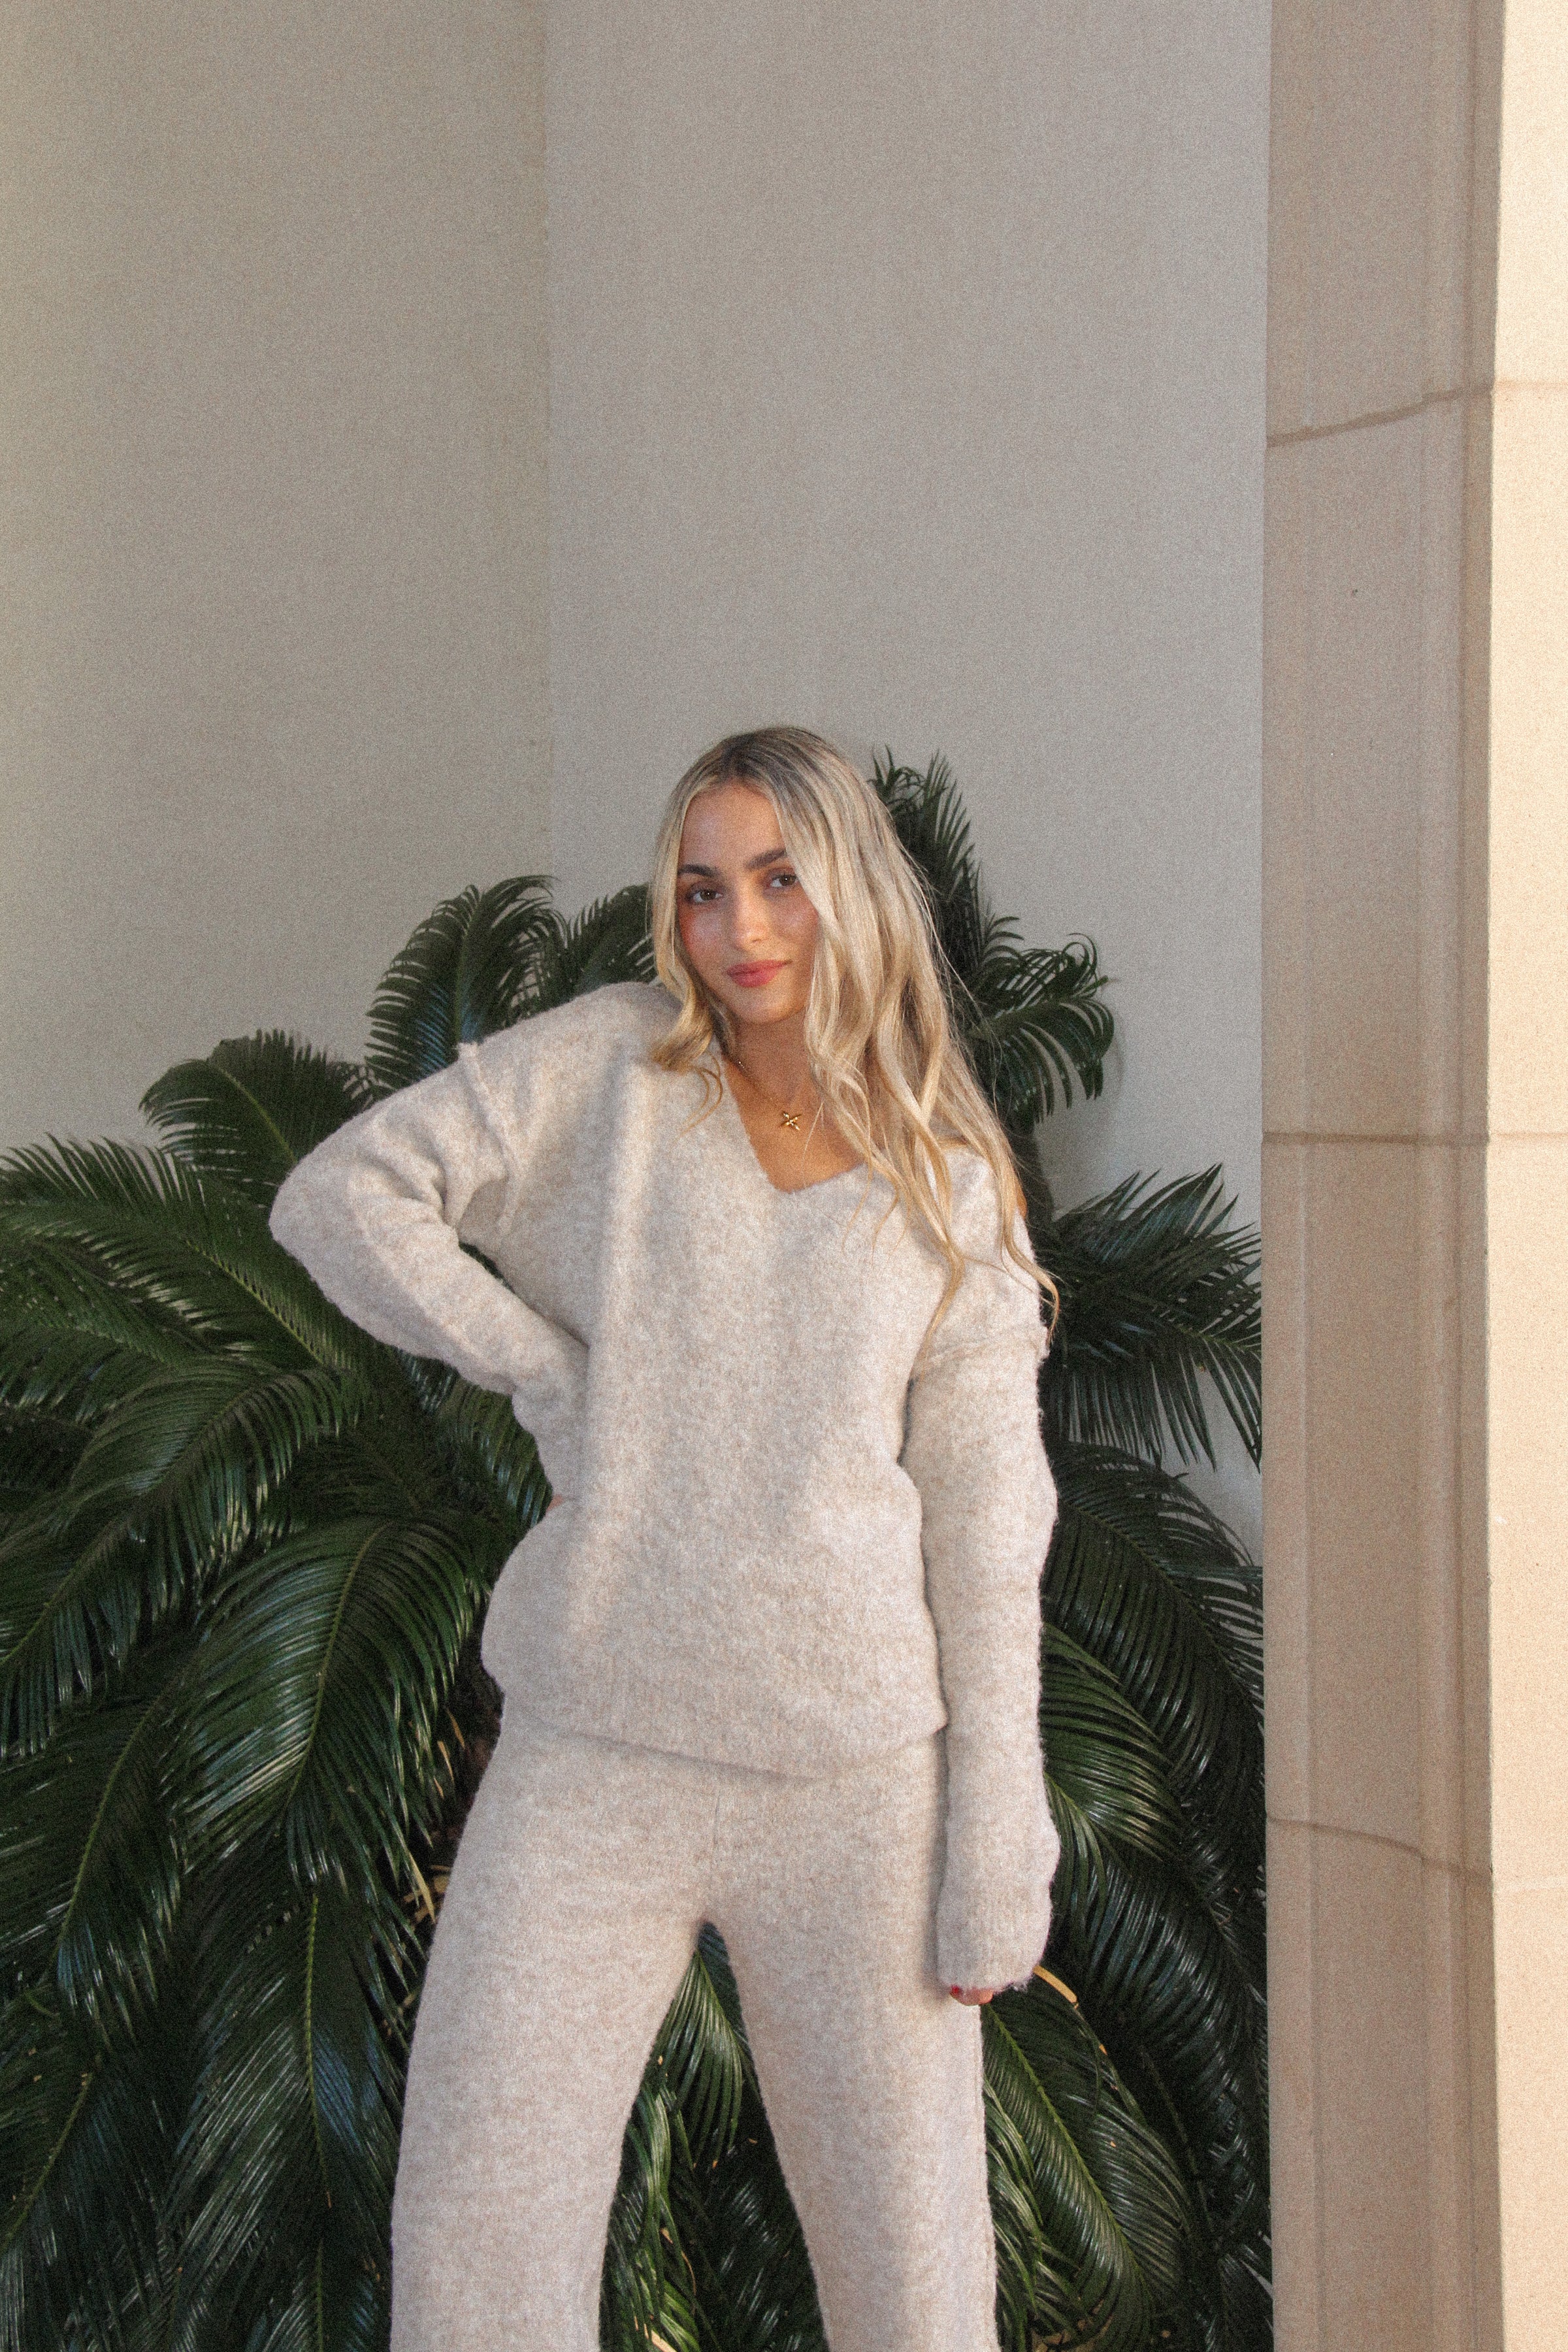 Shop Unisex Oversized Shearling Front Button Loungewear by mieuxbySelect